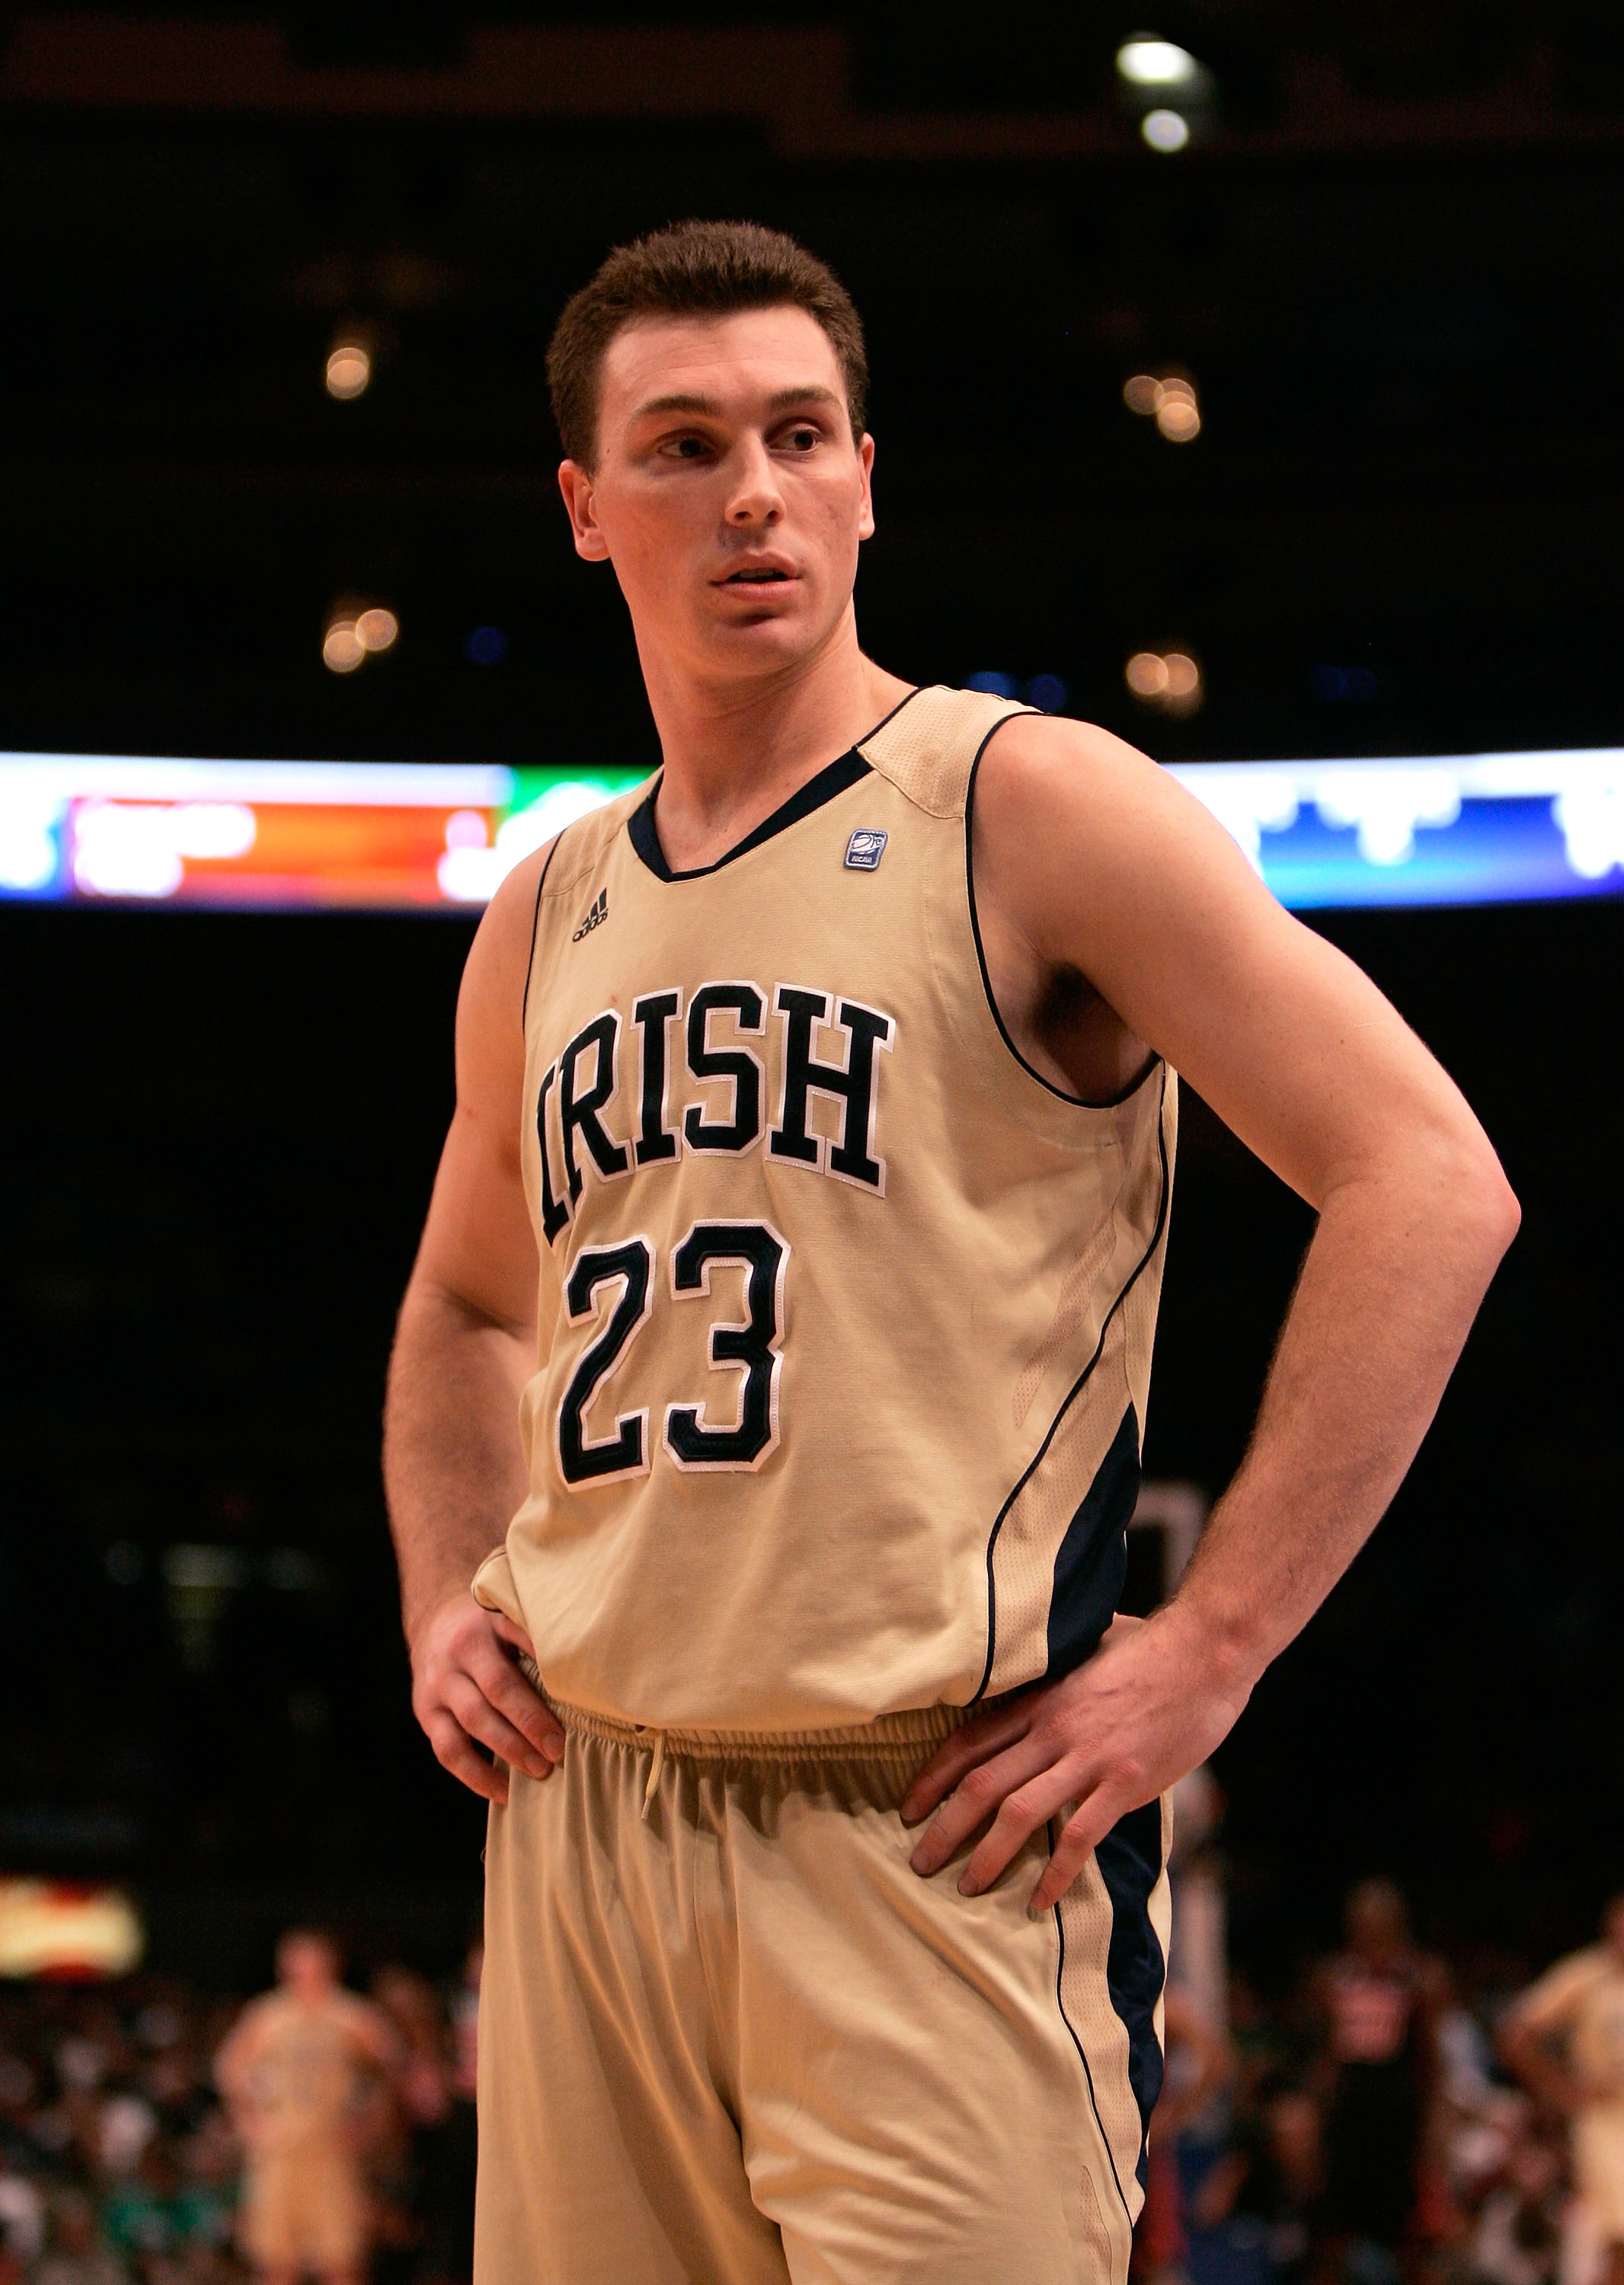 NEW YORK, NY - MARCH 11: Ben Hansbrough #23 of the Notre Dame Fighting Irish looks on during a timeout against the Louisville Cardinals during the semifinals of the 2011 Big East Men's Basketball Tournament presented by American Eagle Outfitters at Madiso